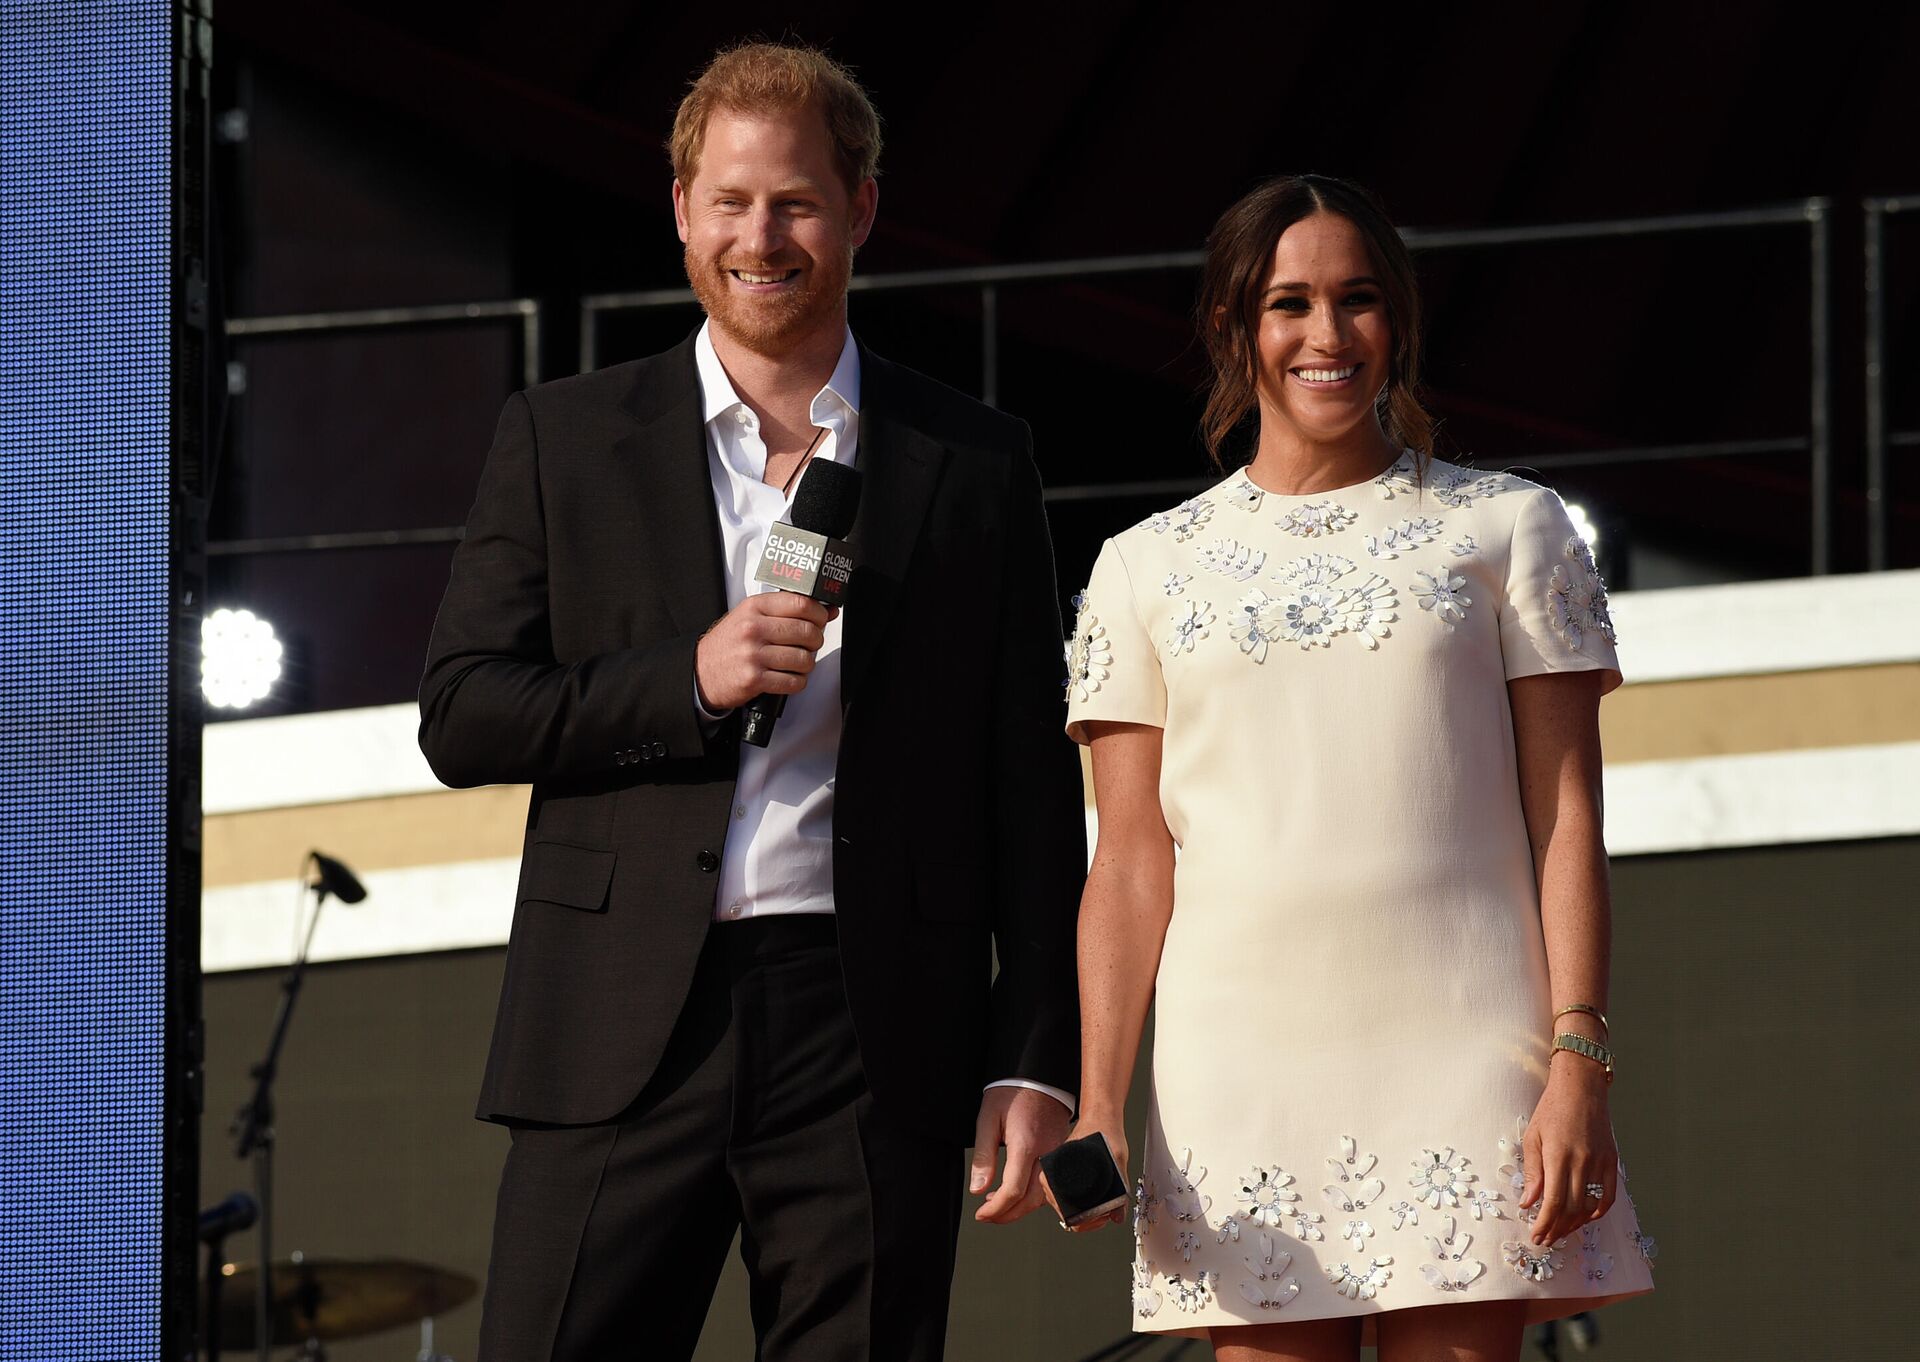 Prince Harry, the Duke of Sussex, left, and Meghan, the Duchess of Sussex speak at Global Citizen Live in Central Park on Saturday, Sept. 25, 2021, in New York. - Sputnik International, 1920, 09.03.2022